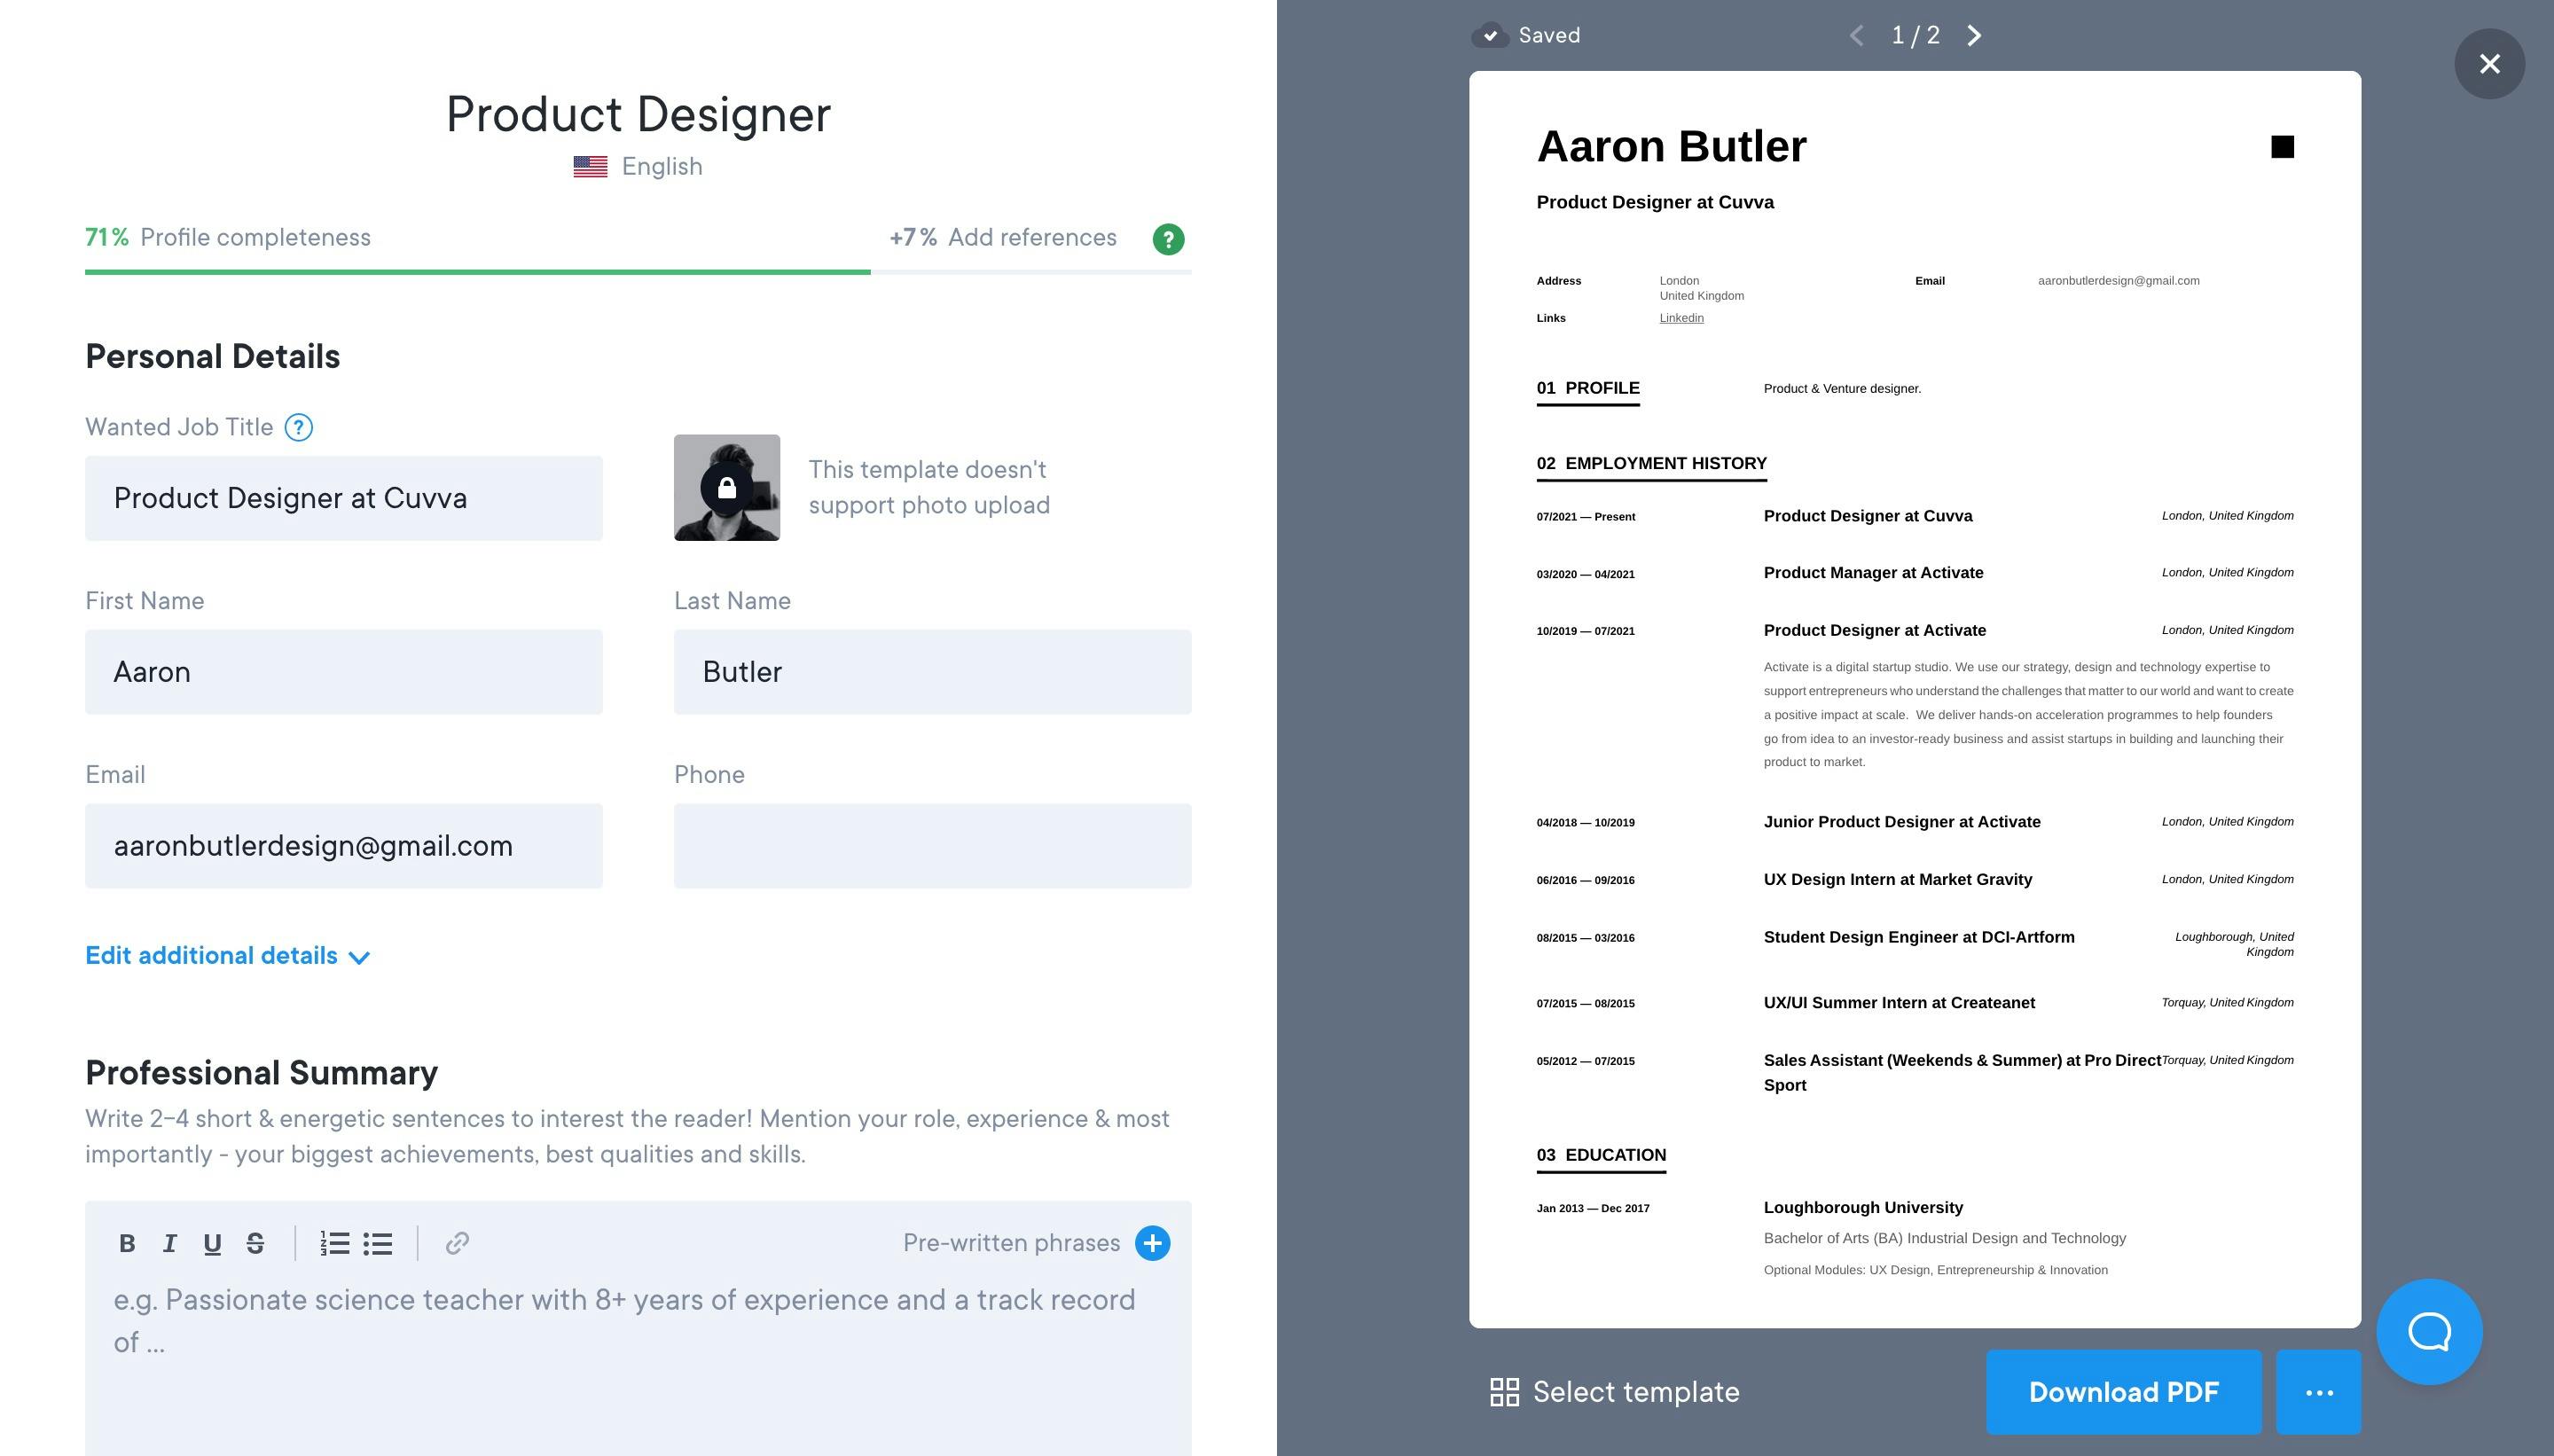 Building your resume with Resume.io